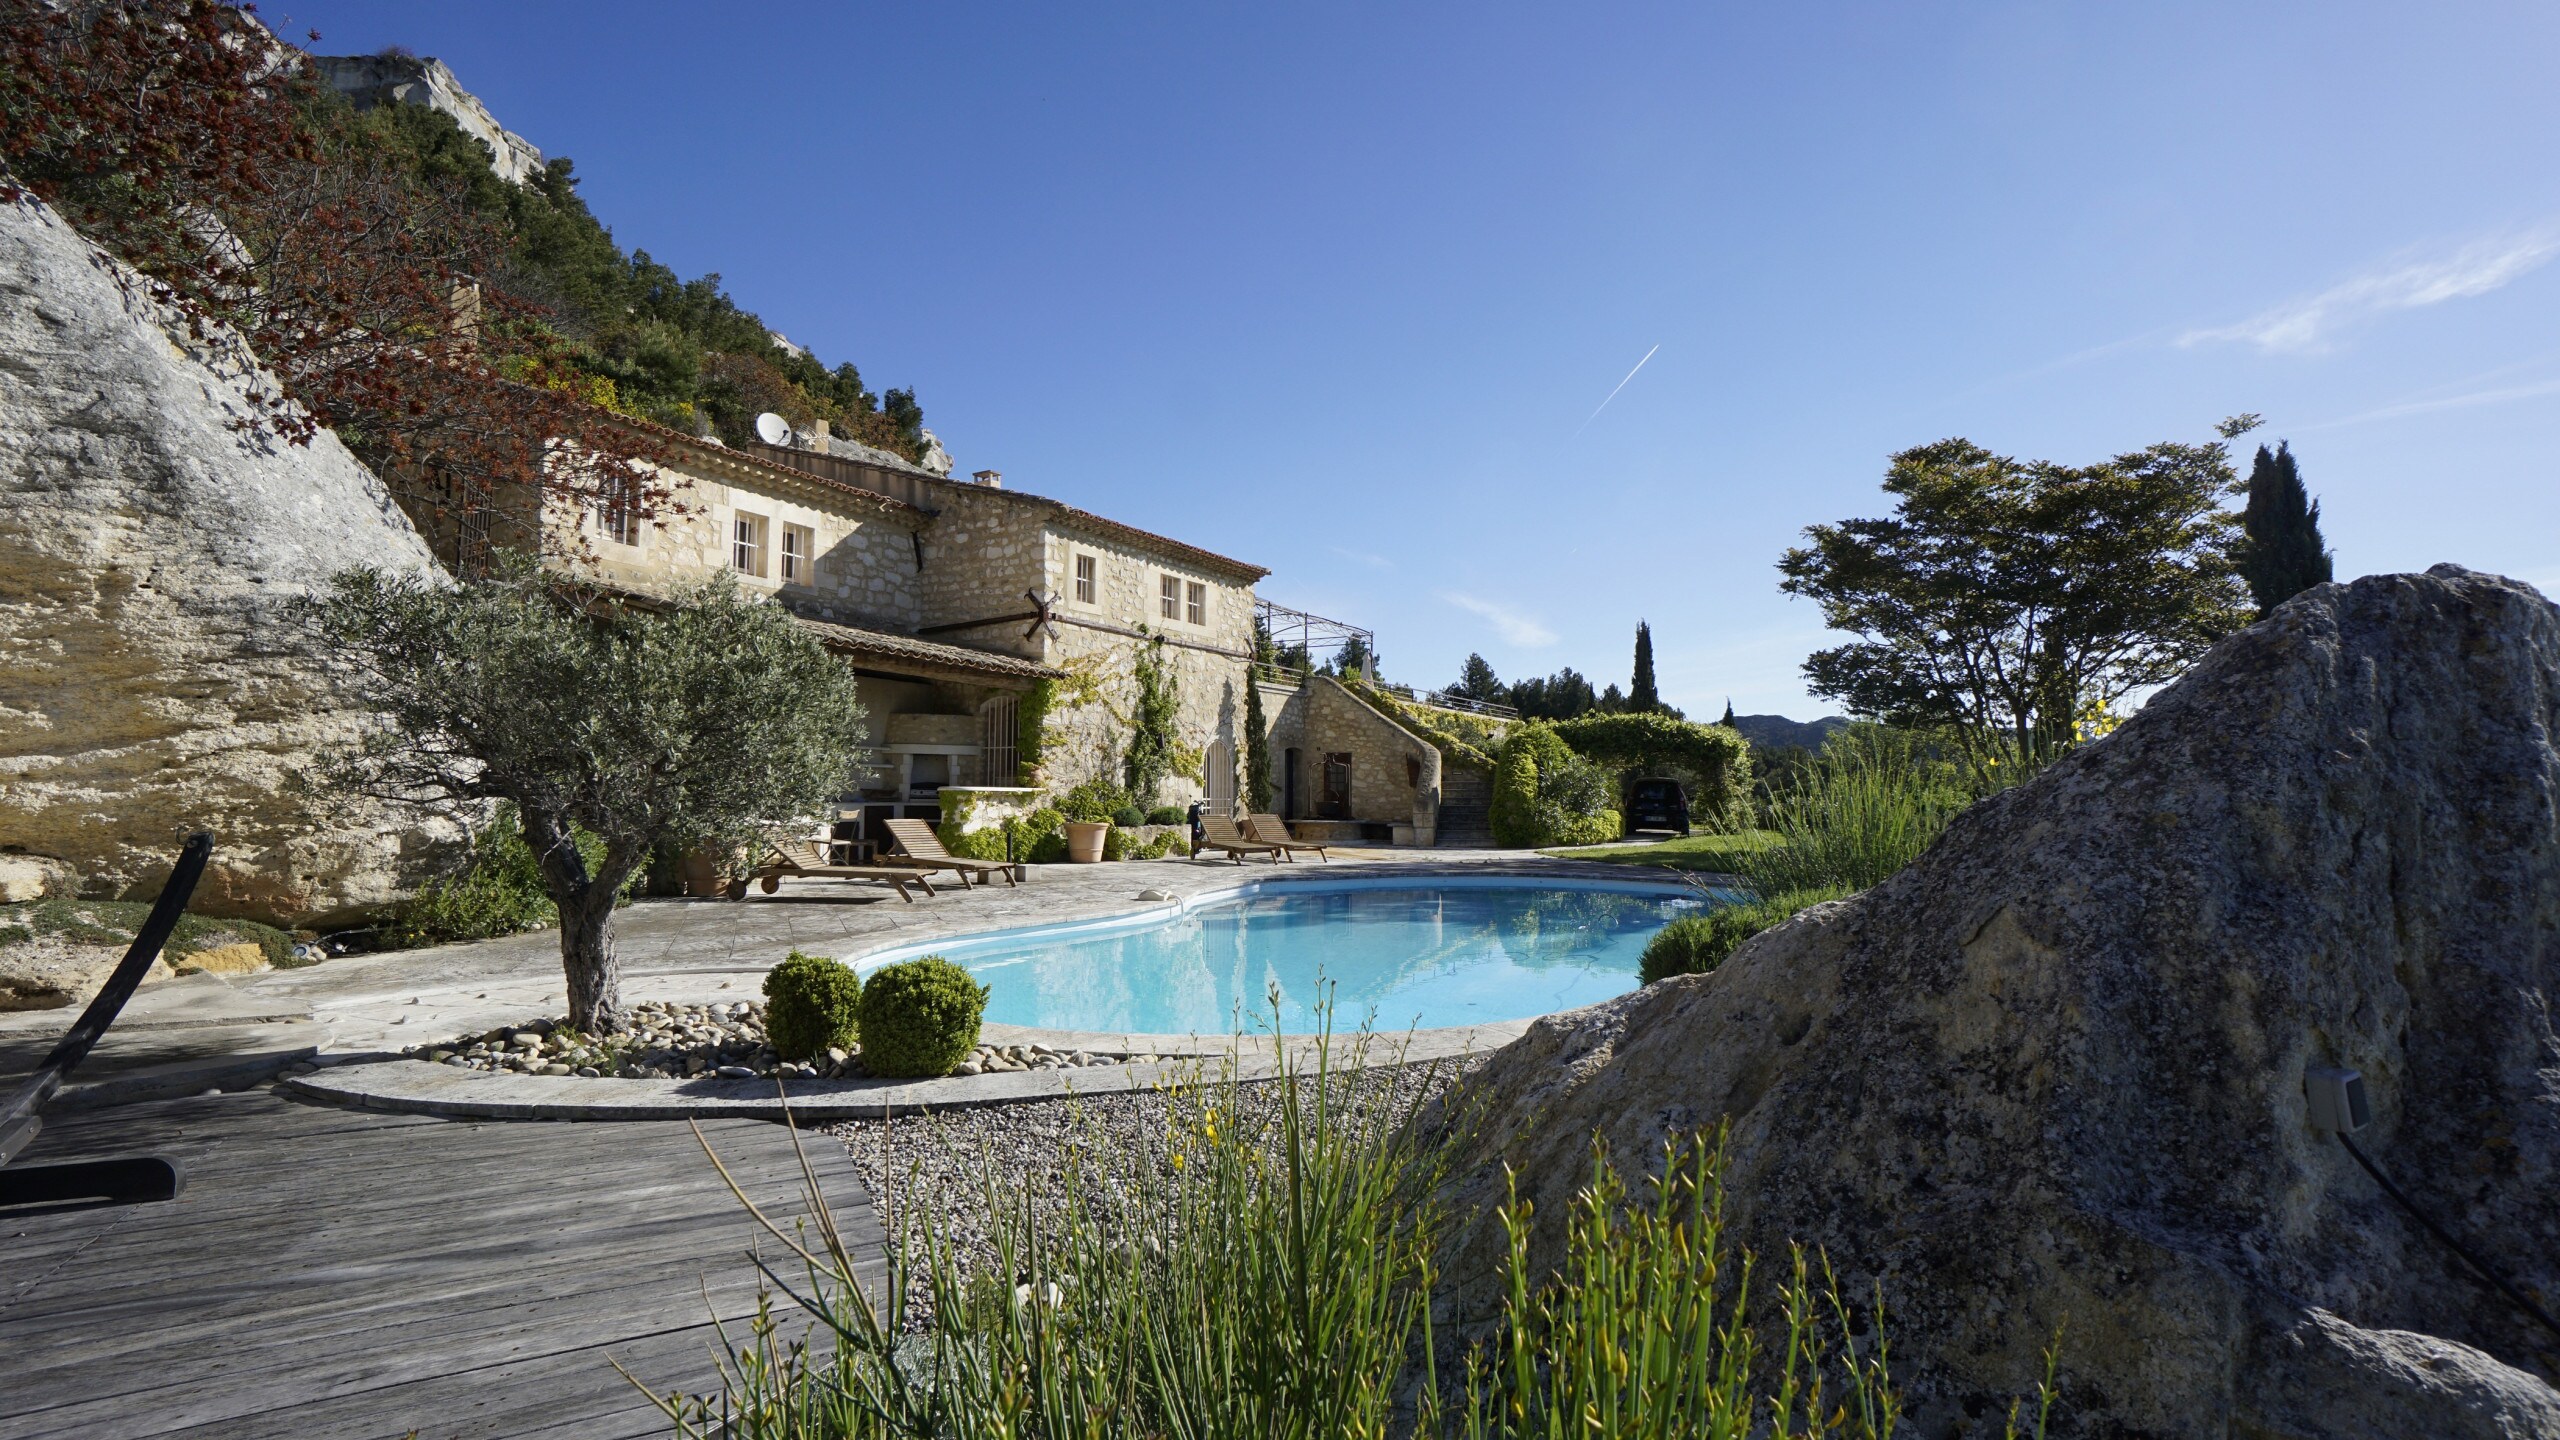 Property Image 2 - Gorgeous 4-bedroom villa in dramatic Provencal surroundings